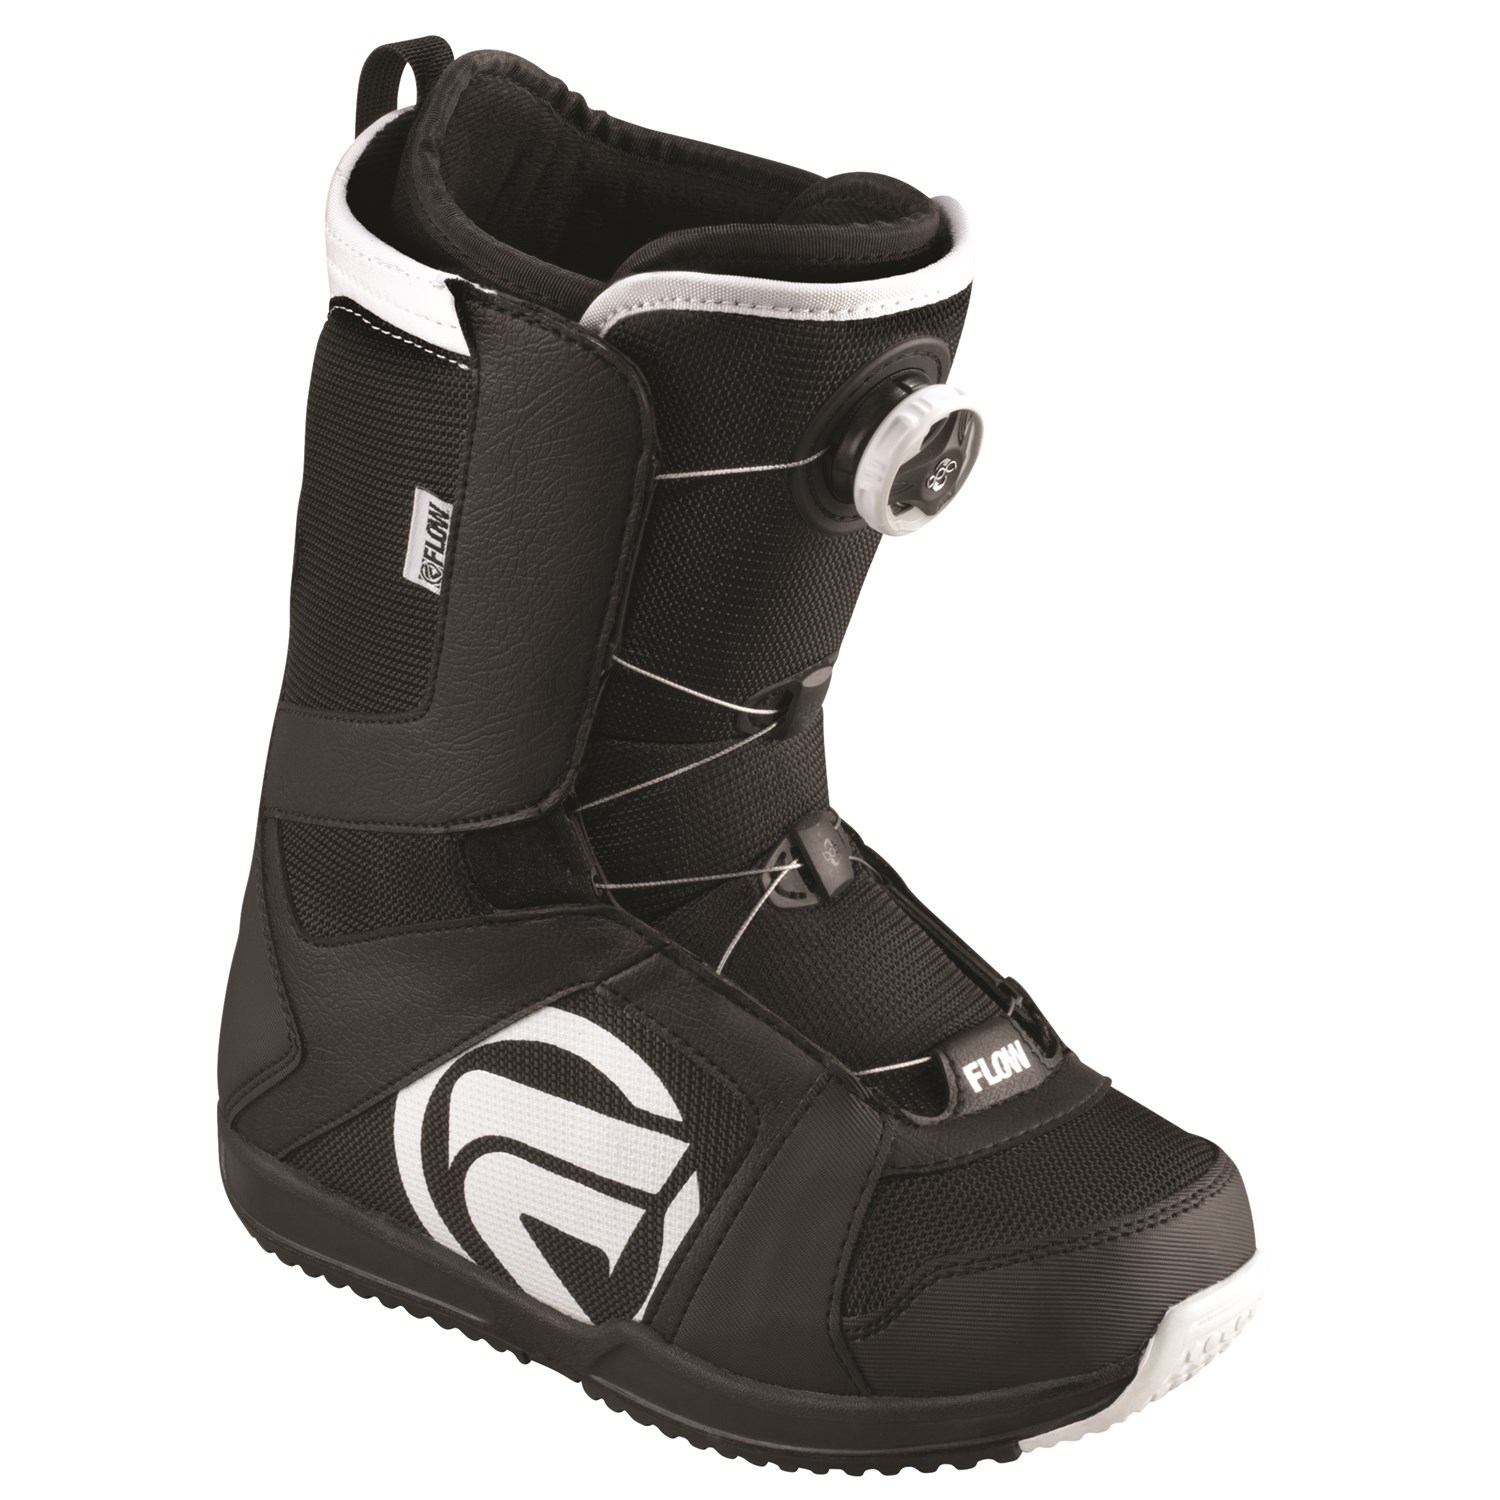 rely None feather Flow Vega Boa Standard Snowboard Boots - Women's 2013 | evo